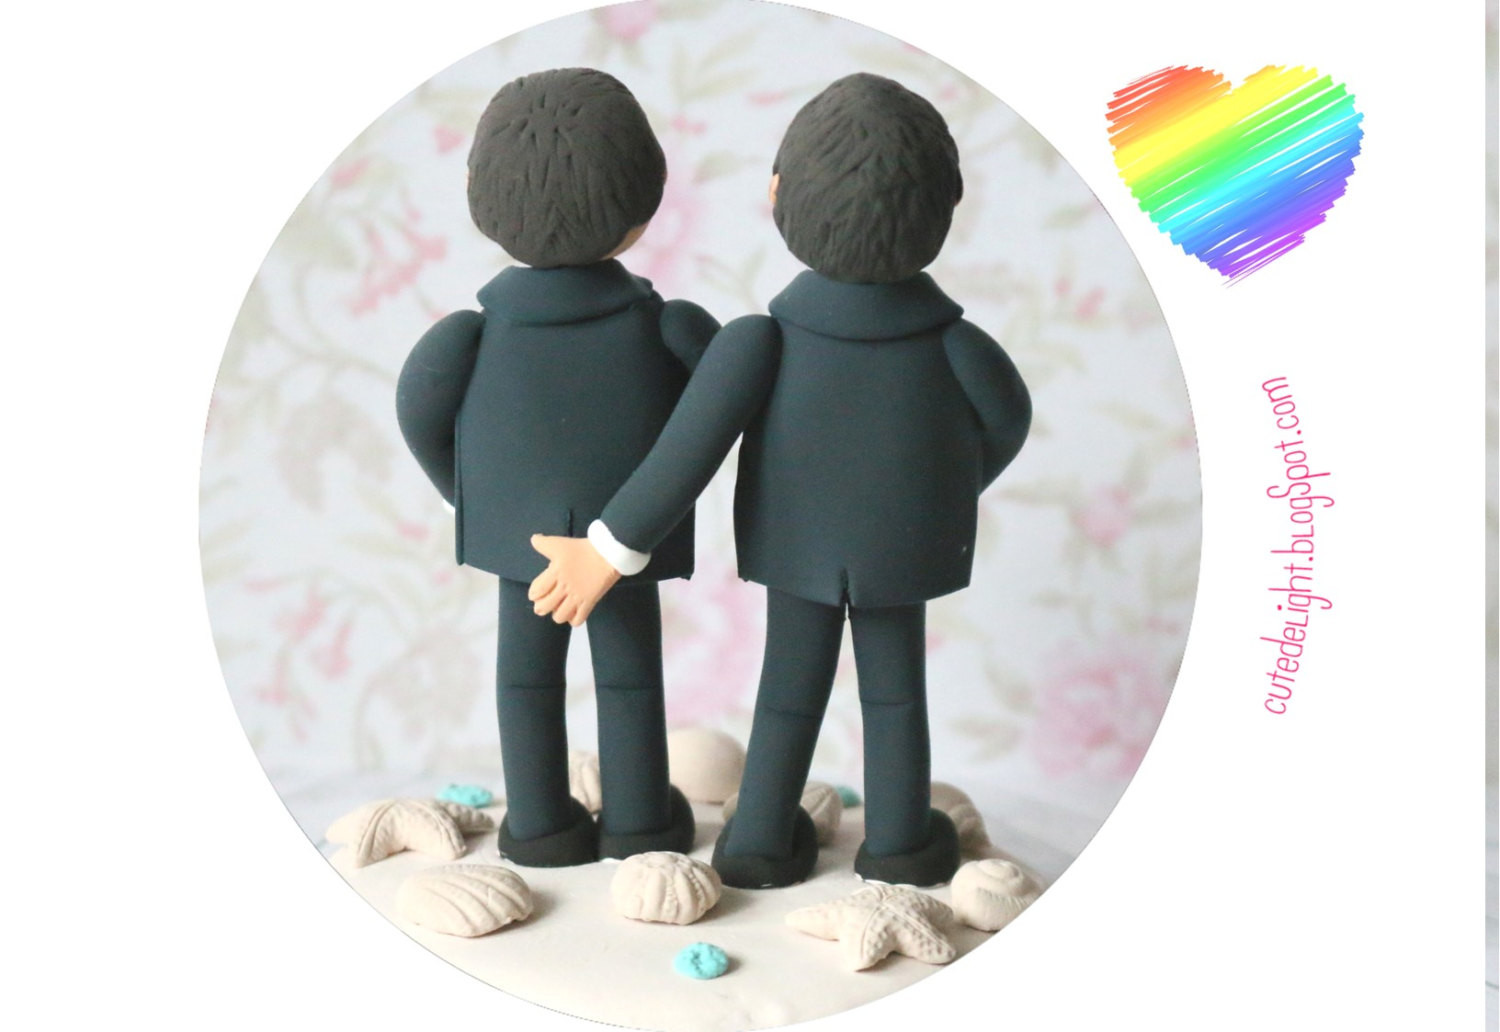 Gay Cake Toppers For Wedding Cakes
 Funny Gay Wedding Cake Toppers Grabbing but grooms wedding